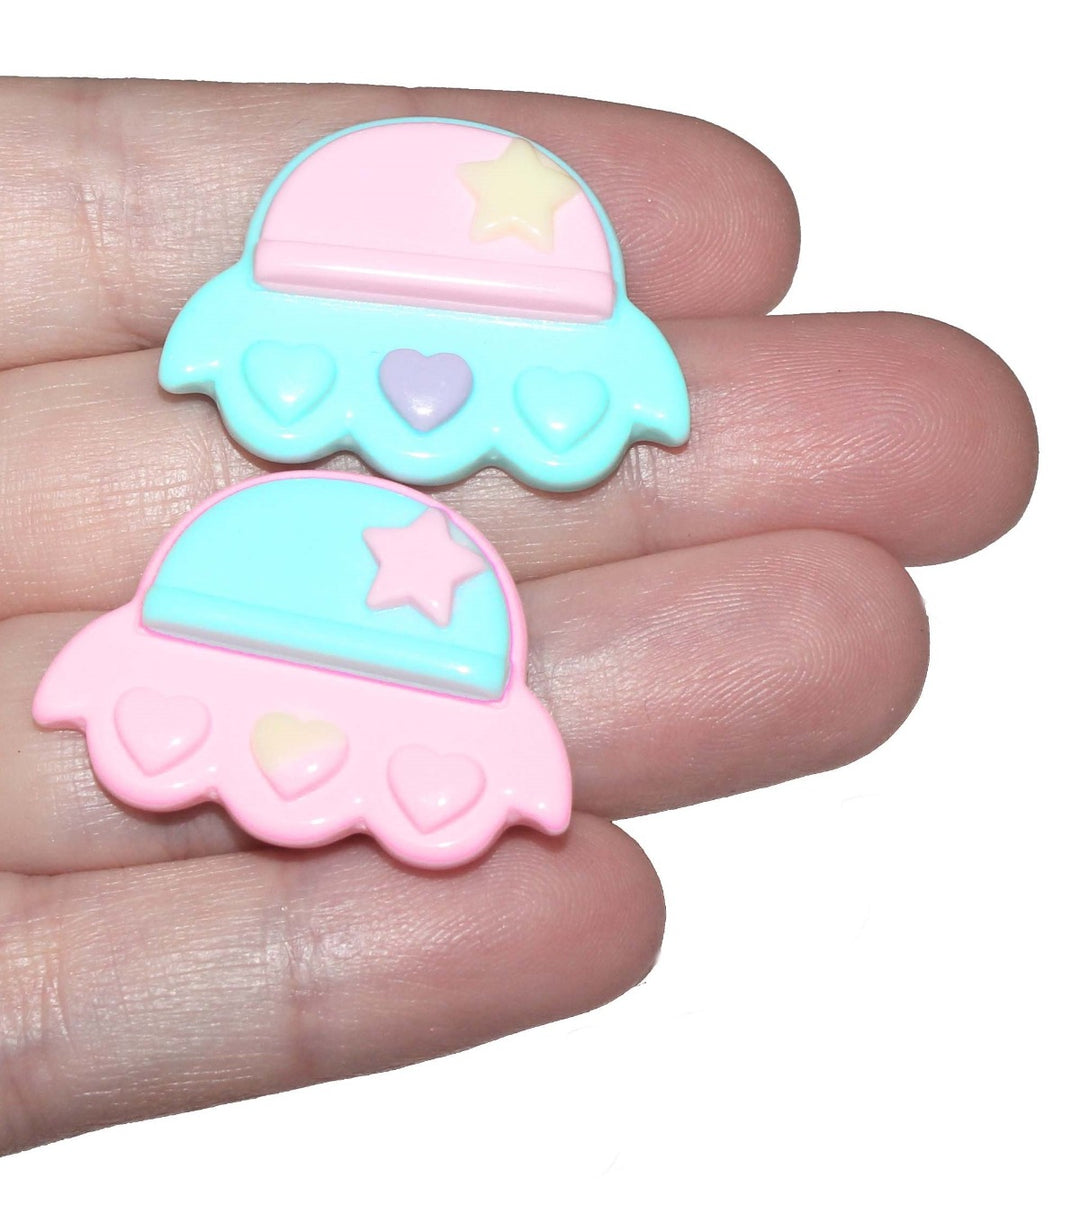 Pastel Kawaii UFO cabochons for crafts, jewelry making, etc by GlitterLambs.com